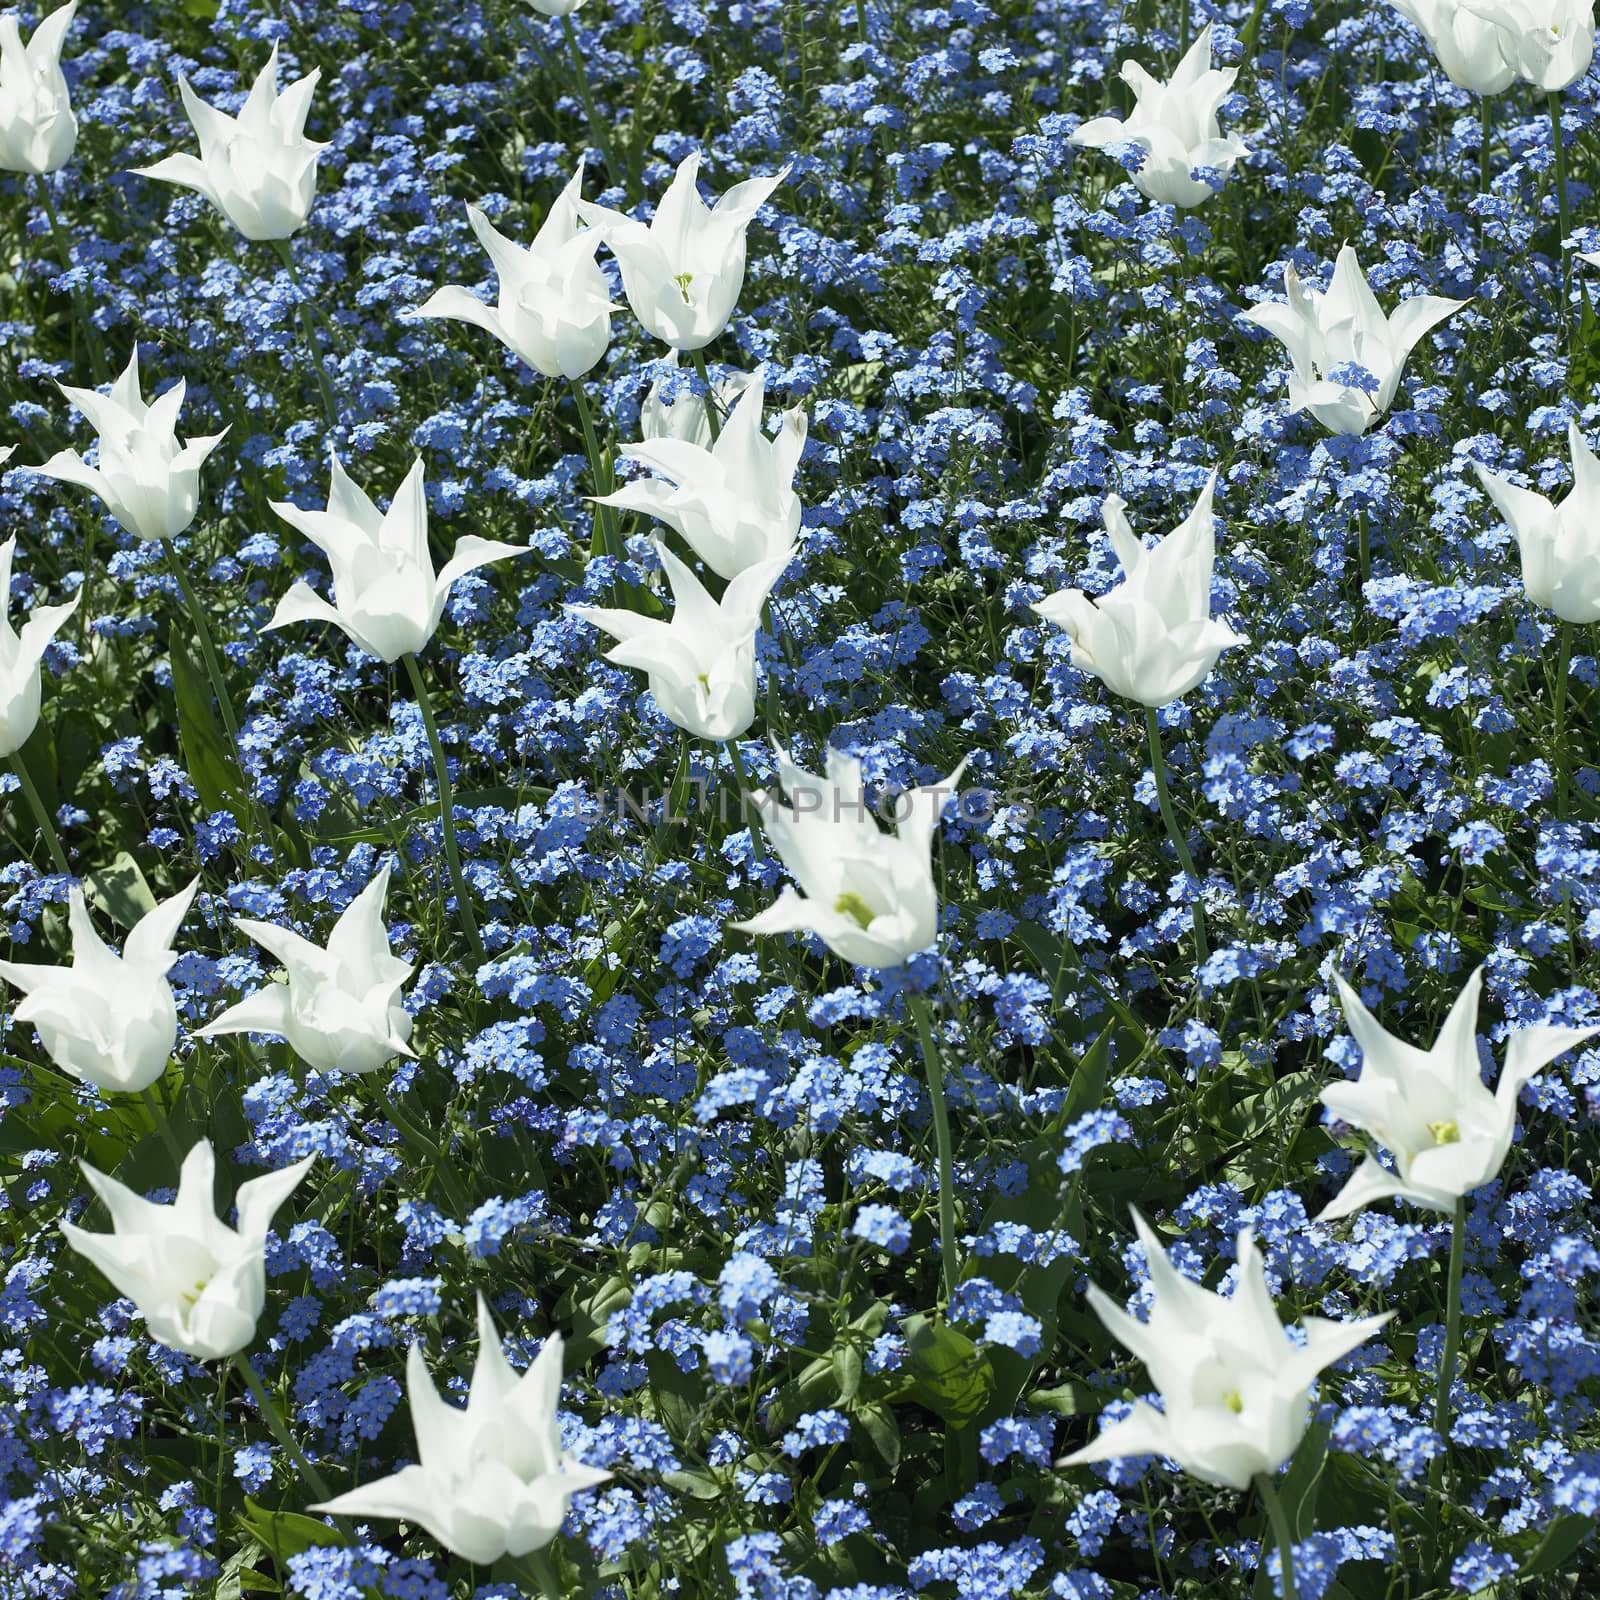 Bed of white tulips and small blue flowers